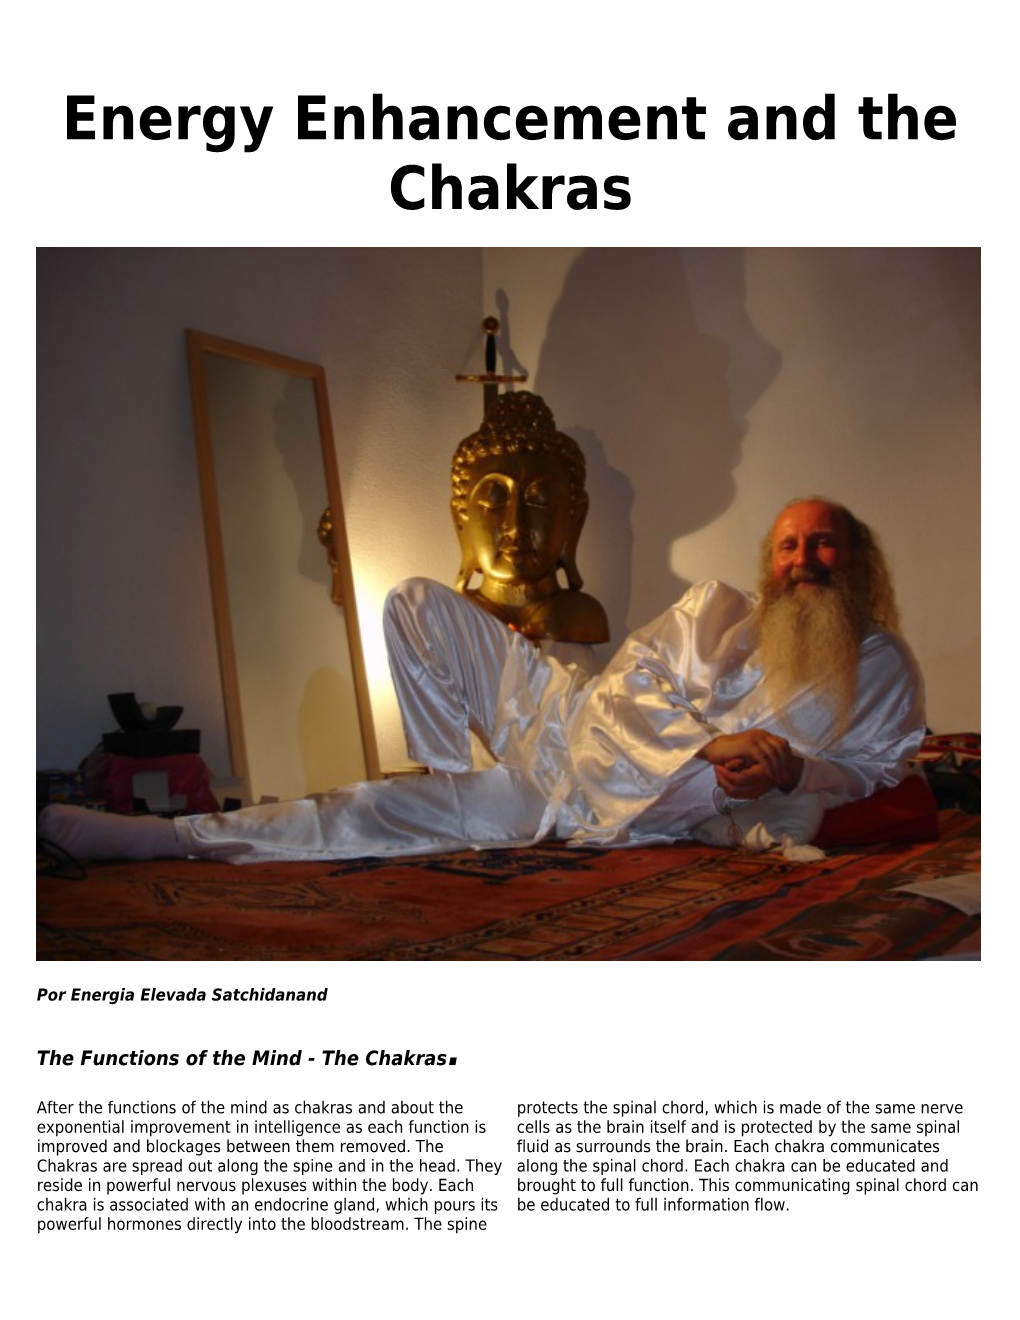 Energy Enhancement and the Chakras